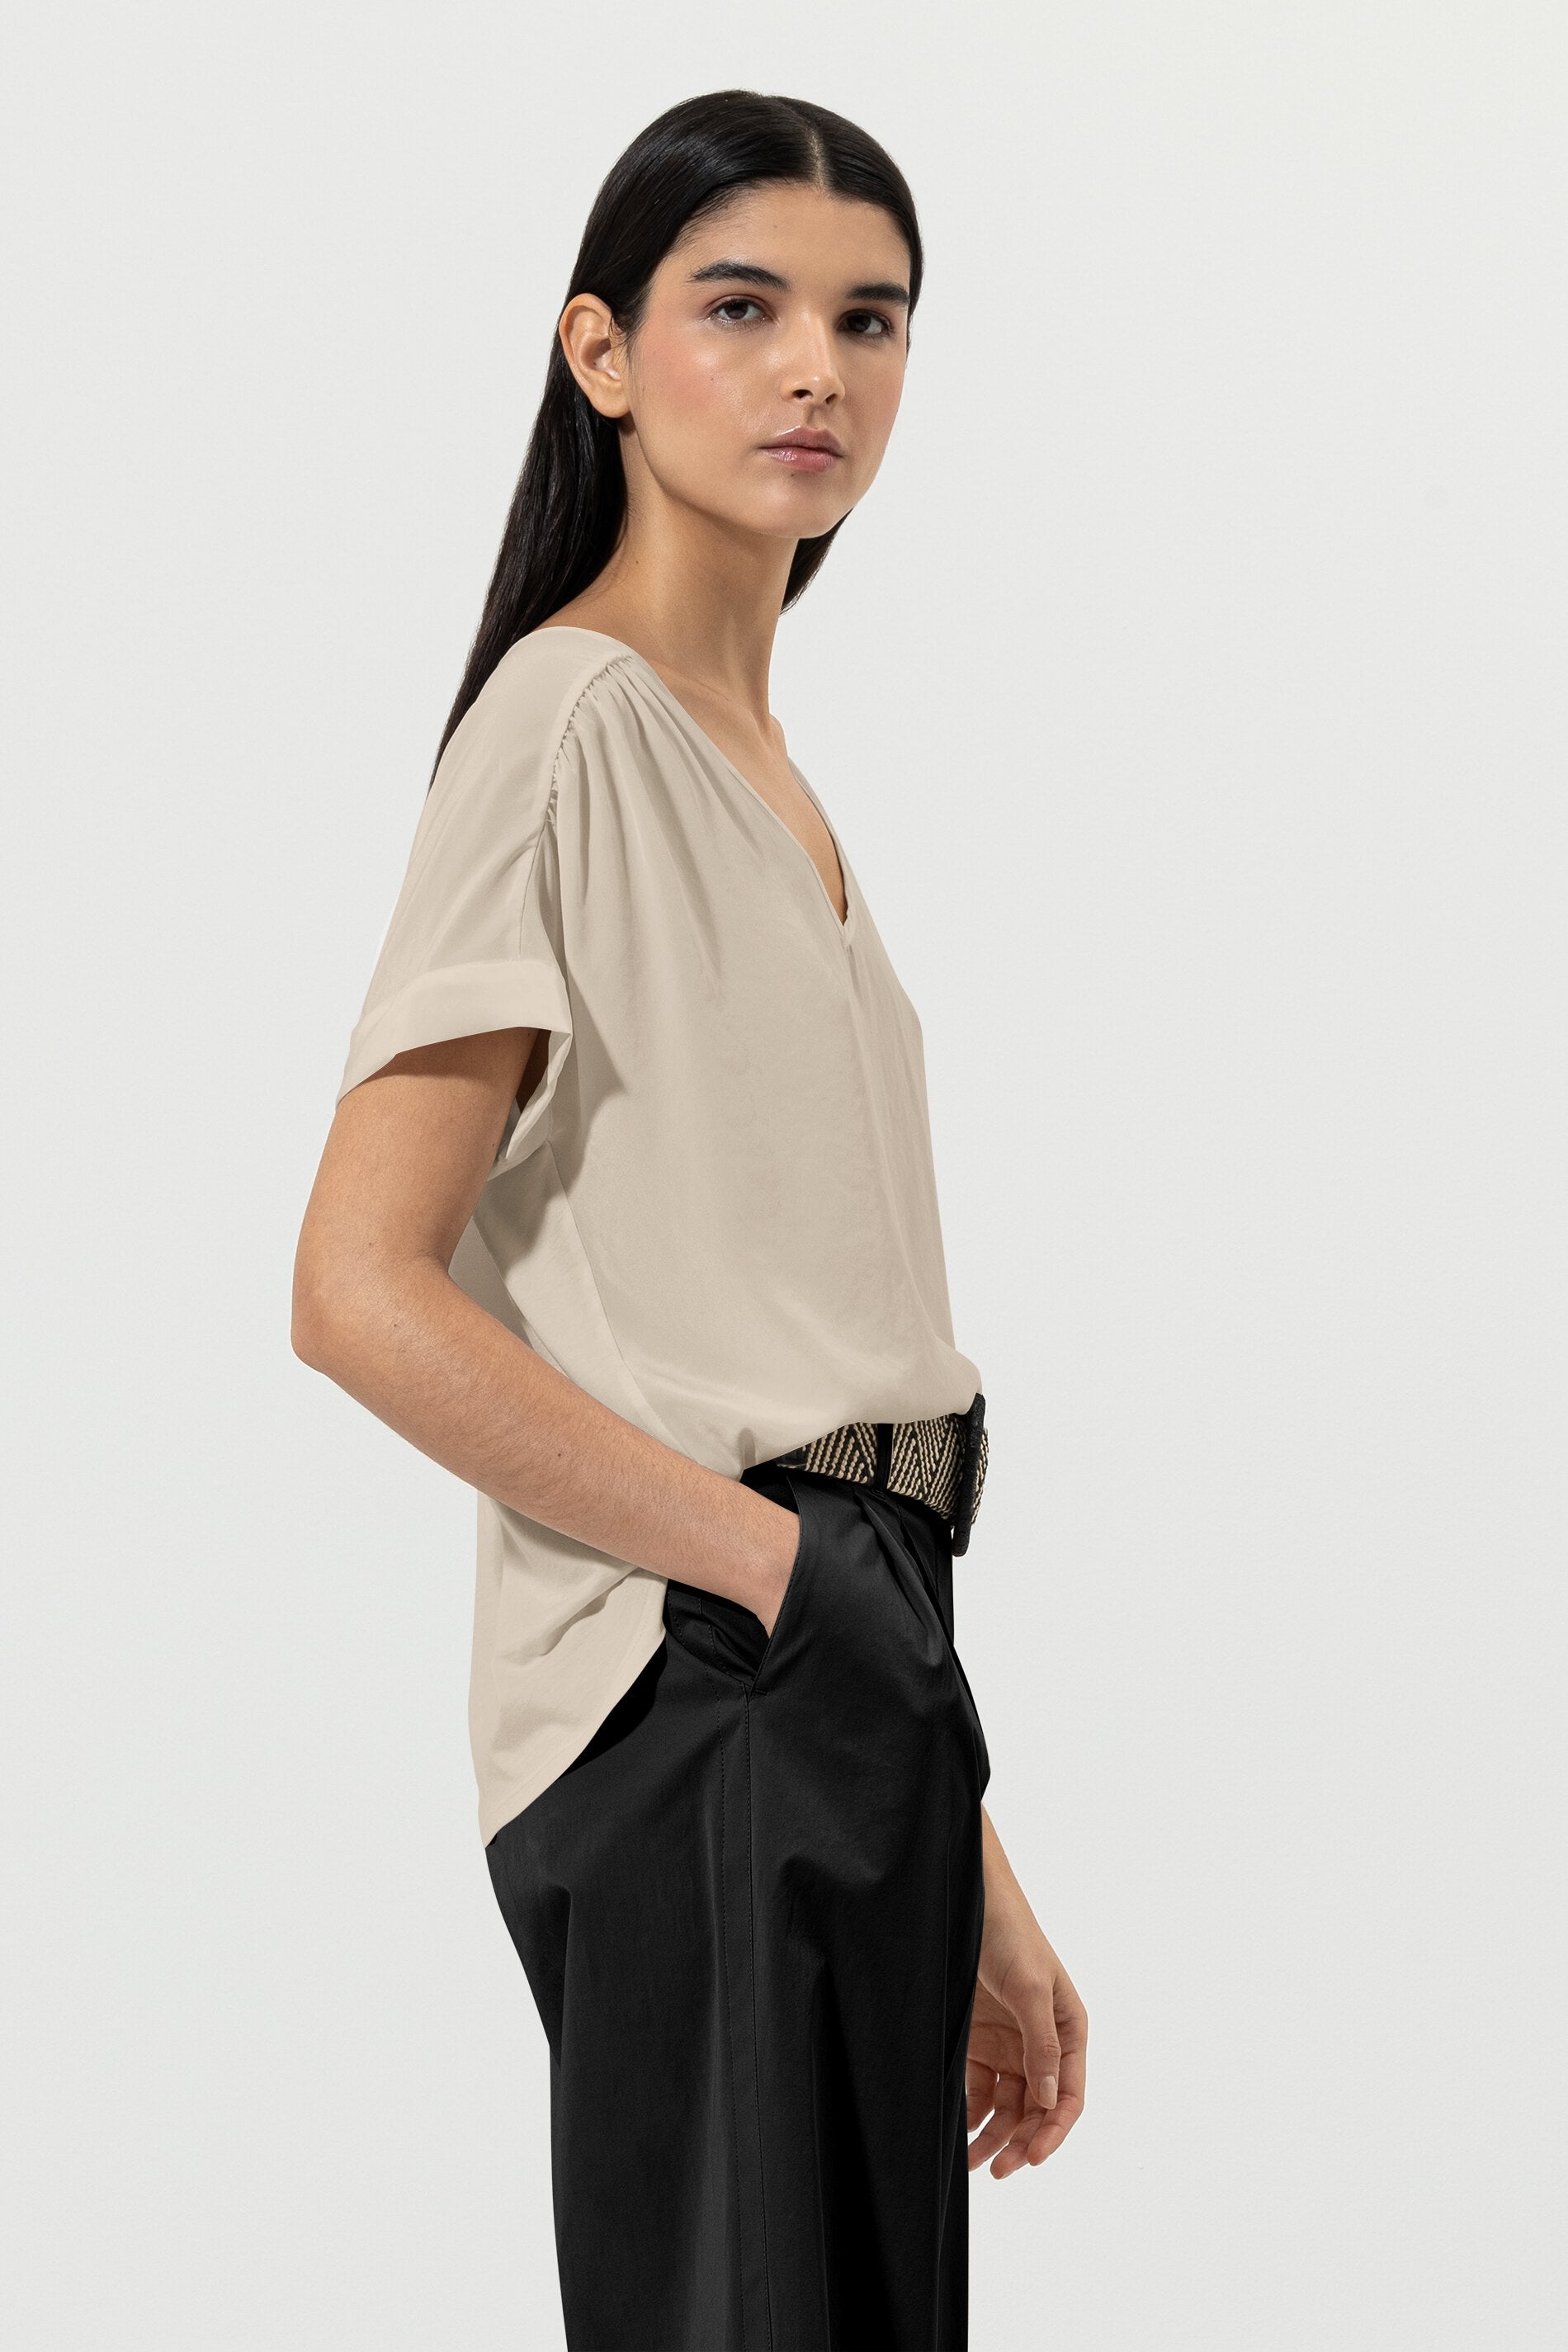 LUISA-CERANO-OUTLET-SALE-Blusenshirt-mit-V-Neck-Shirts-ARCHIVE-COLLECTION-3_2c12a439-7568-4ddb-9e90-6c6195f9f1f8.jpg